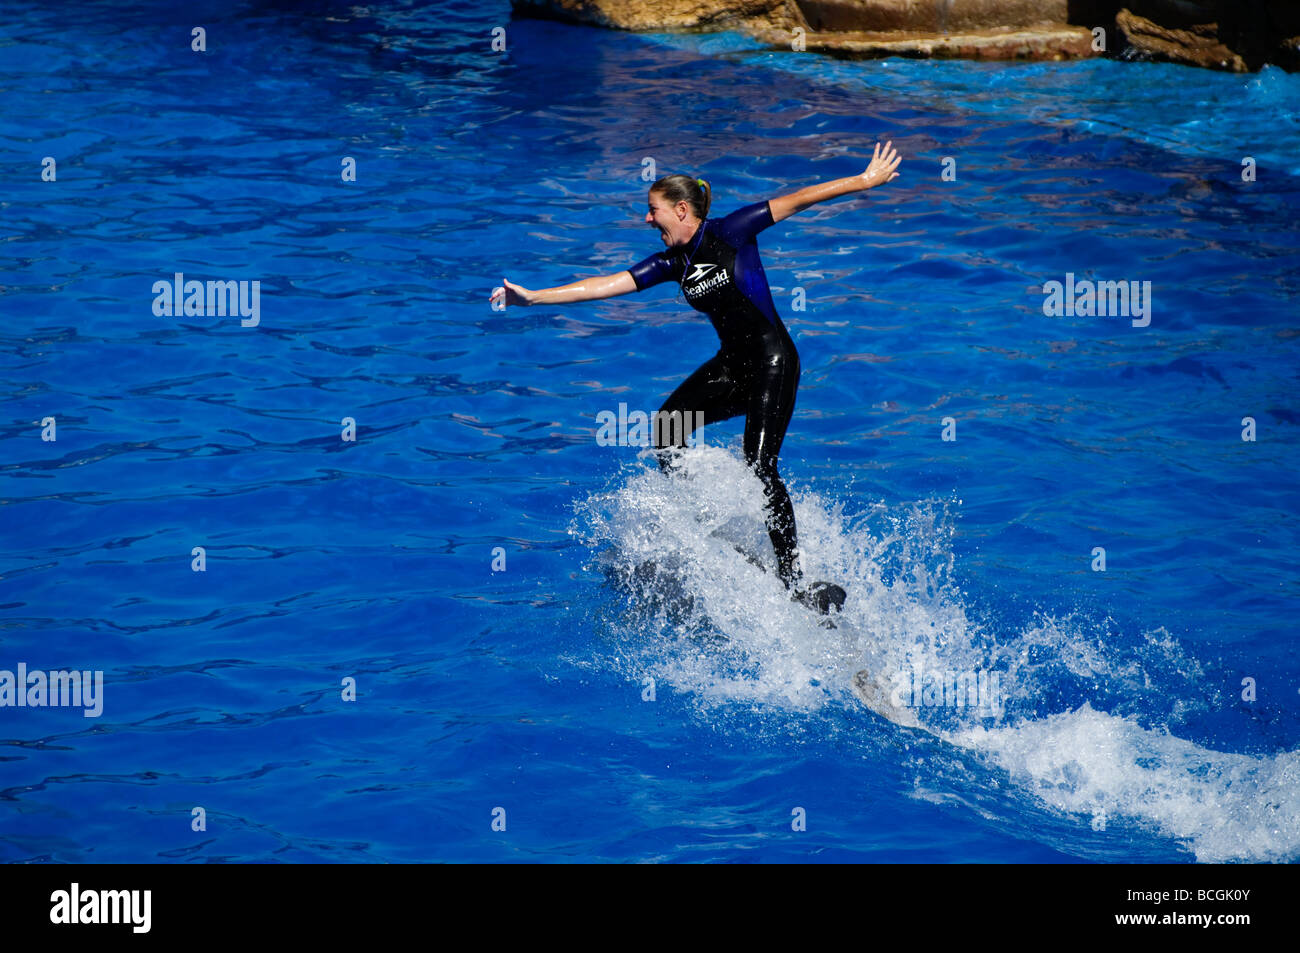 Sea World Trainer surfing an Orca Stock Photo